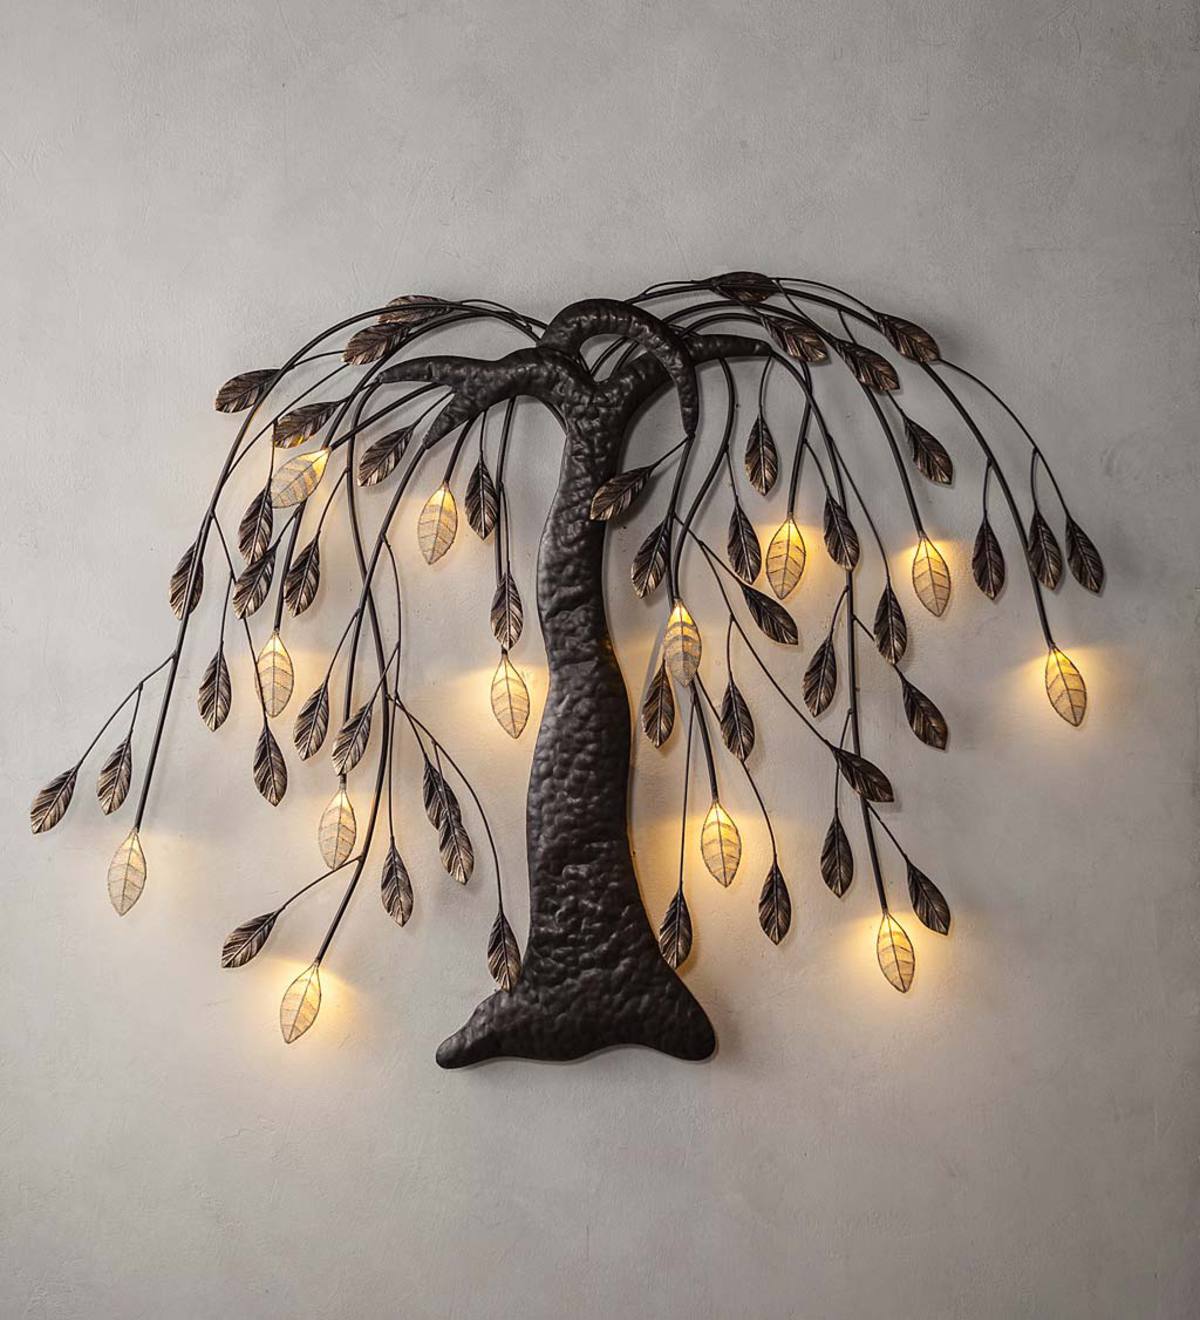 Lighted Willow Tree Wall Art